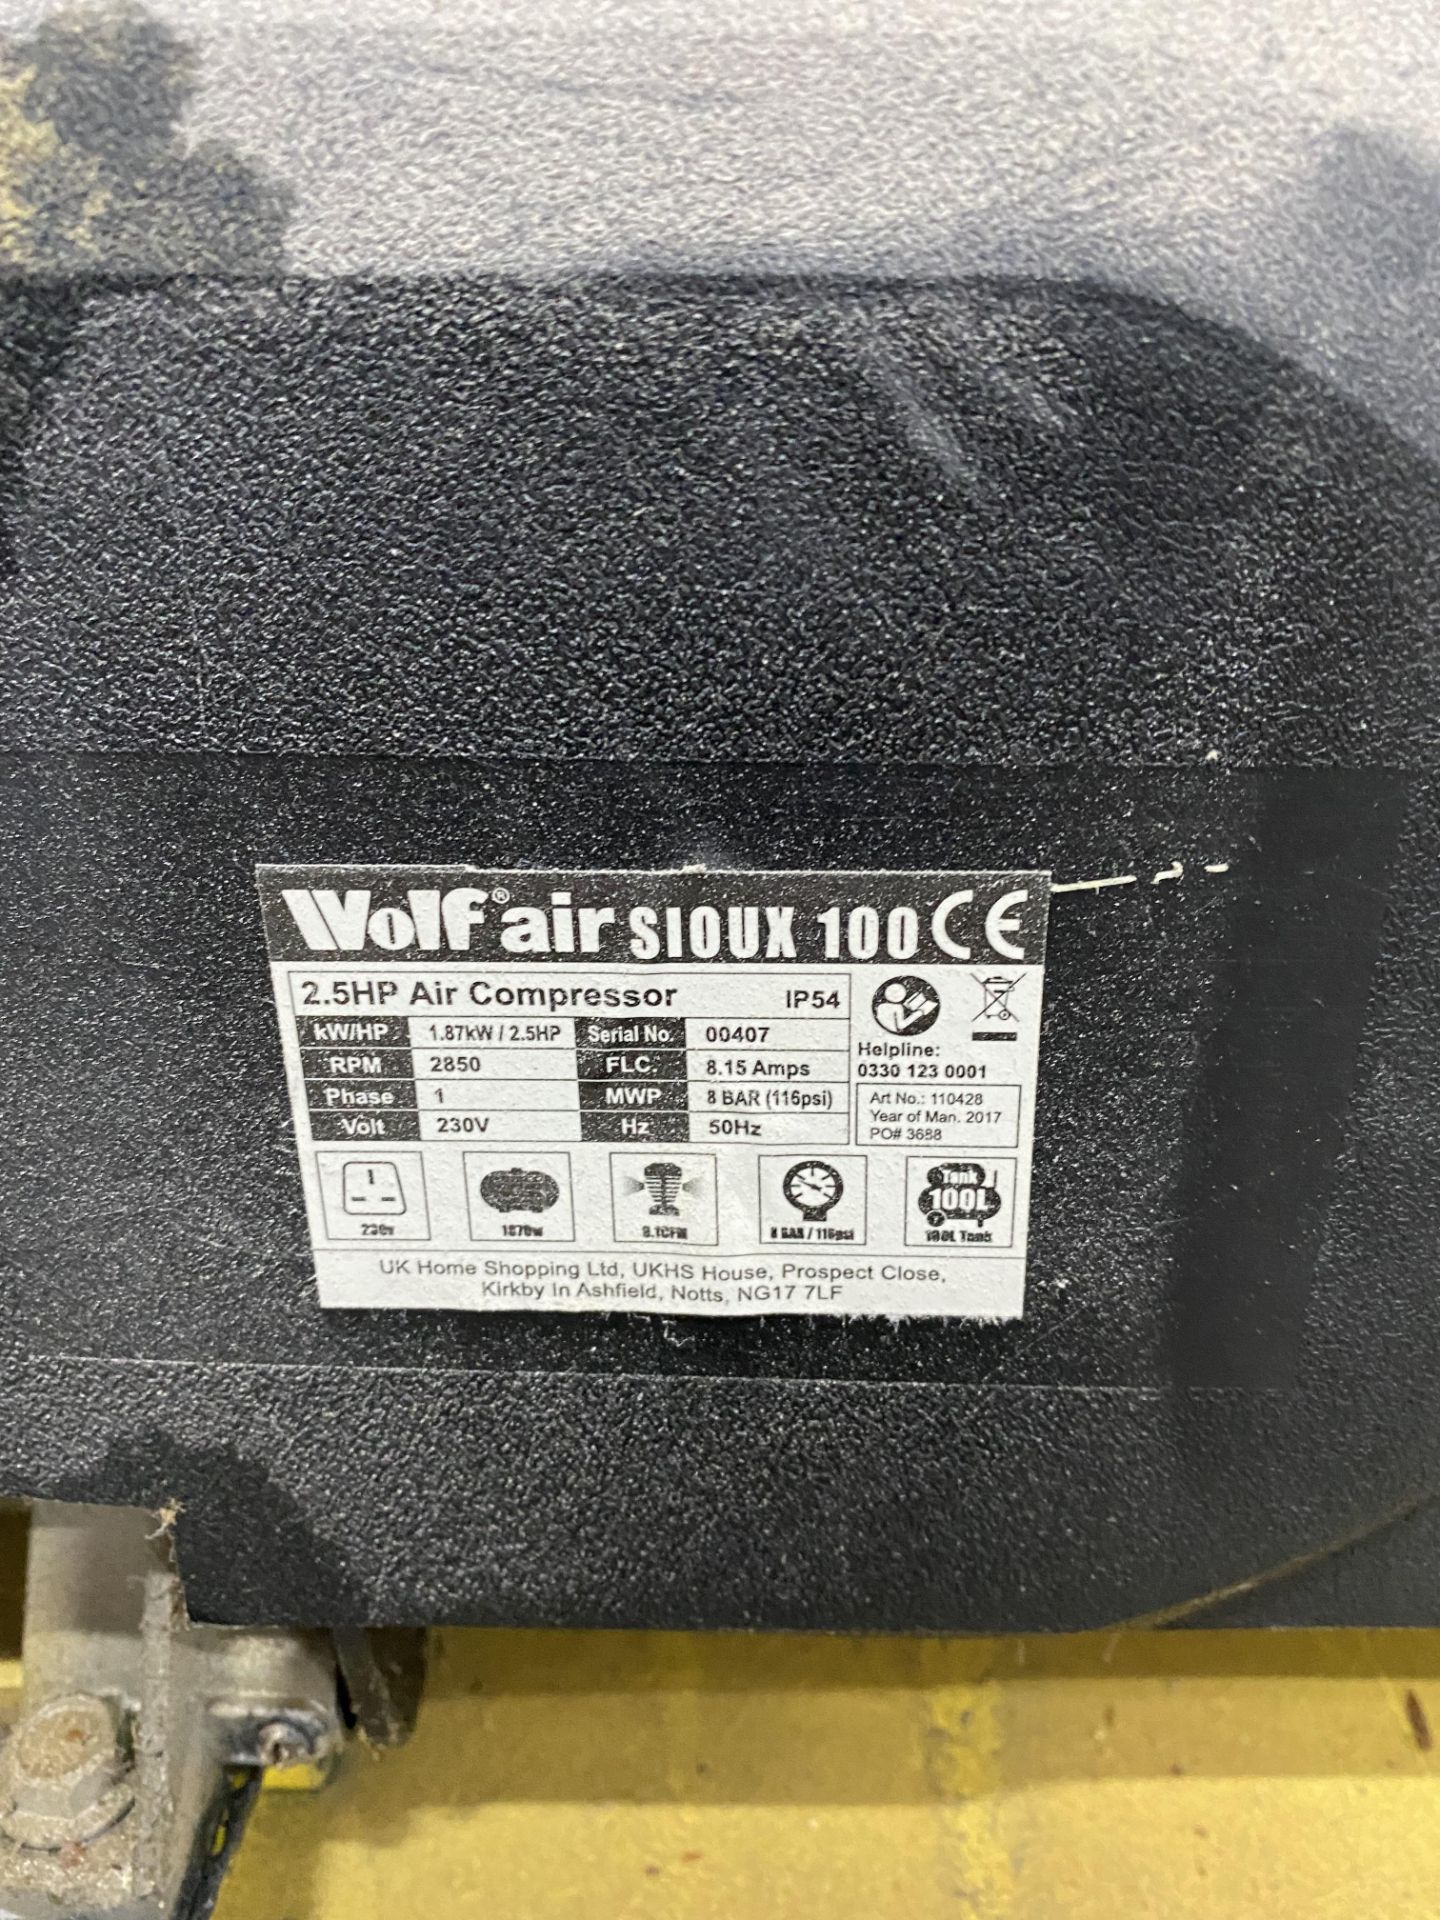 Wolfair Sioux 100 2.5hp 230v Air Compressor - Image 4 of 4